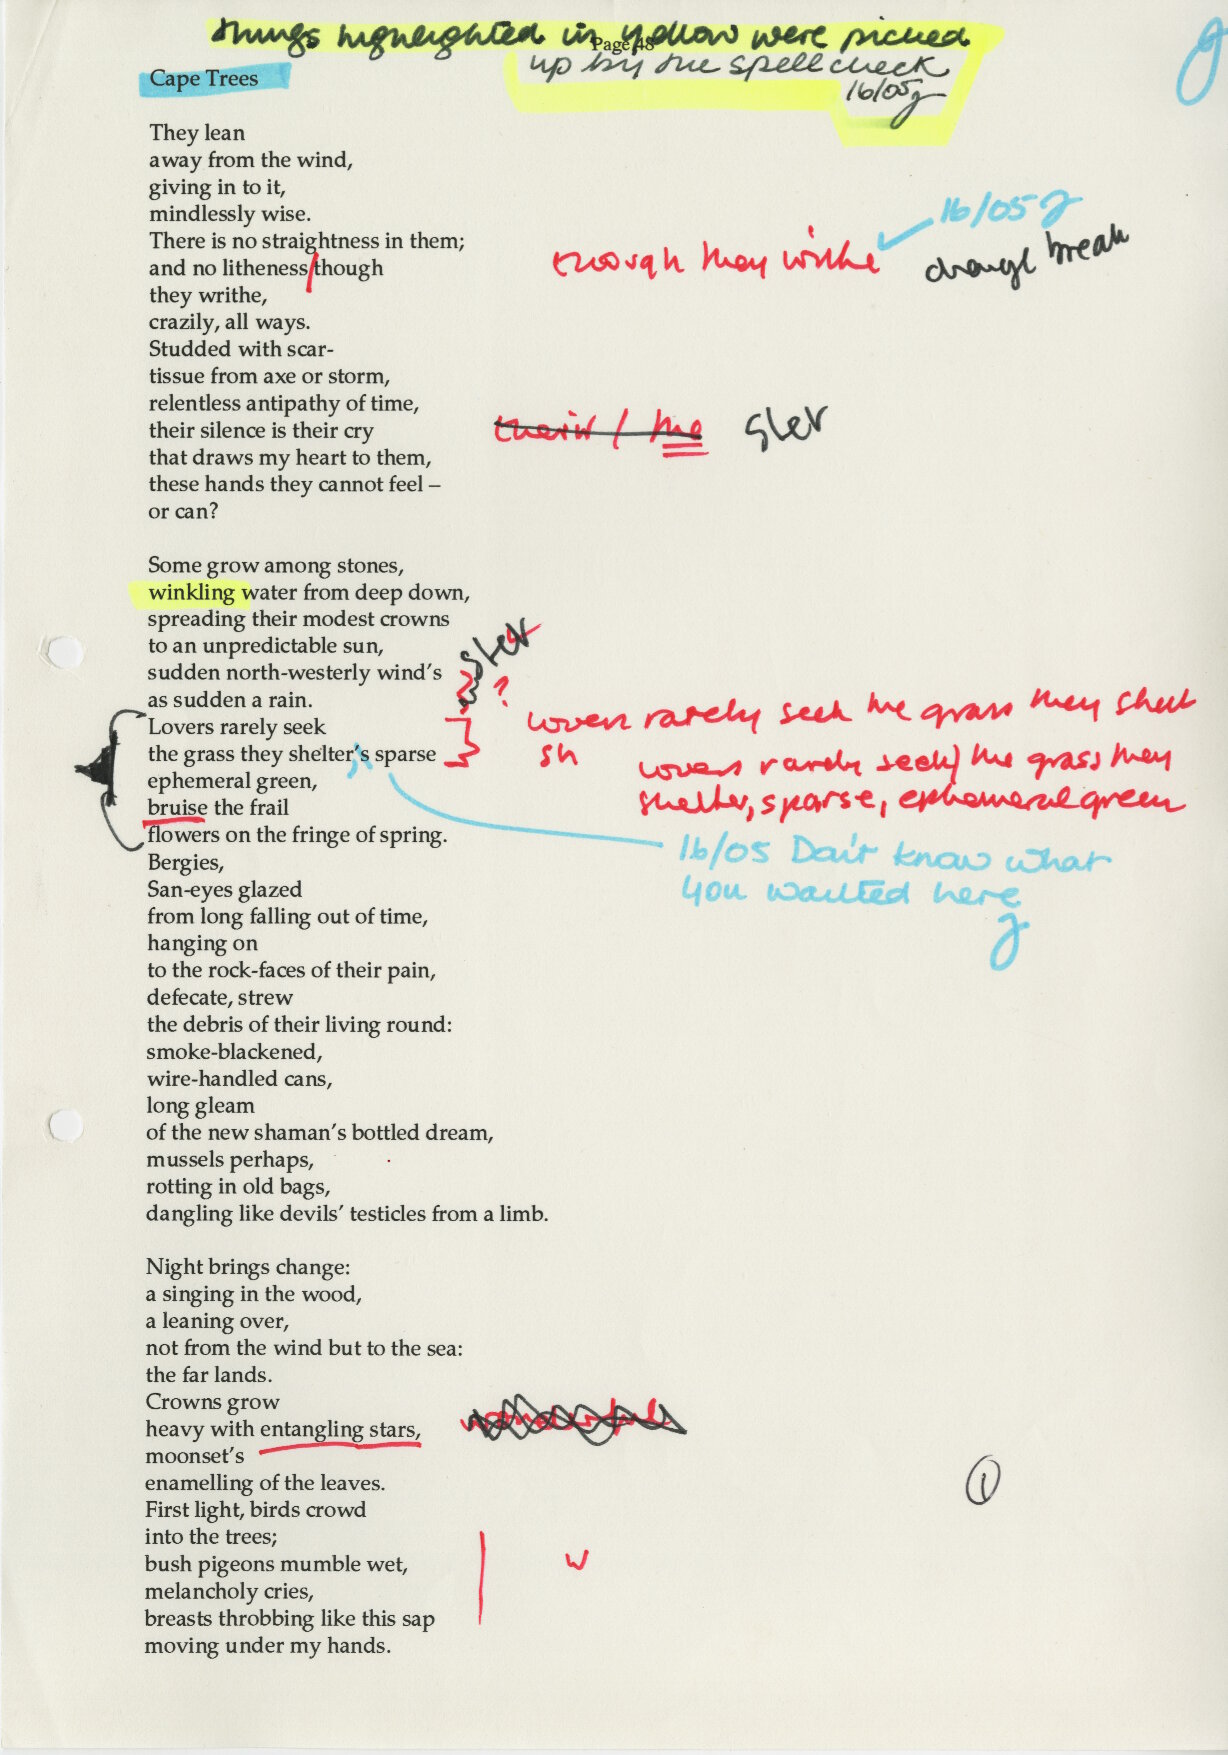 Draft versions of <em>The Lemon Tree</em> was published in 1995 by Snailpress. The editor, Gus Ferguson, colour codes his comments.